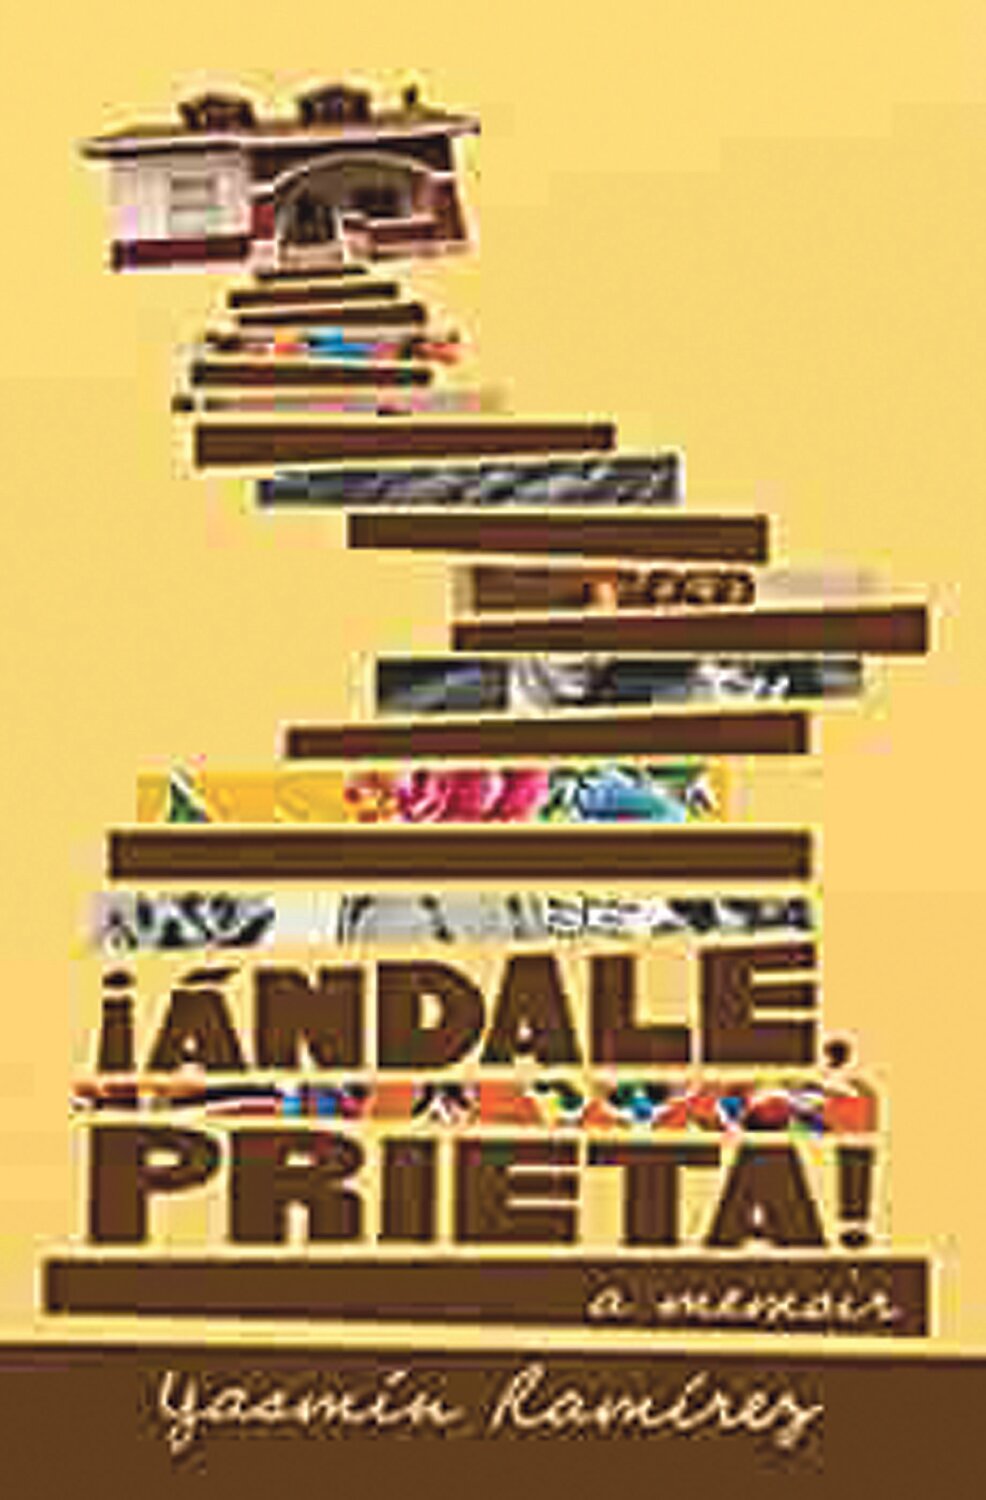 In her memoir, ¡Ándale Prieta!, Yasmin Ramirez, delicately shares the experience of a young Latina growing up on the U.S-Mexico Border and subsequent years searching for herself and fulfillment after the passing of her grandmother.